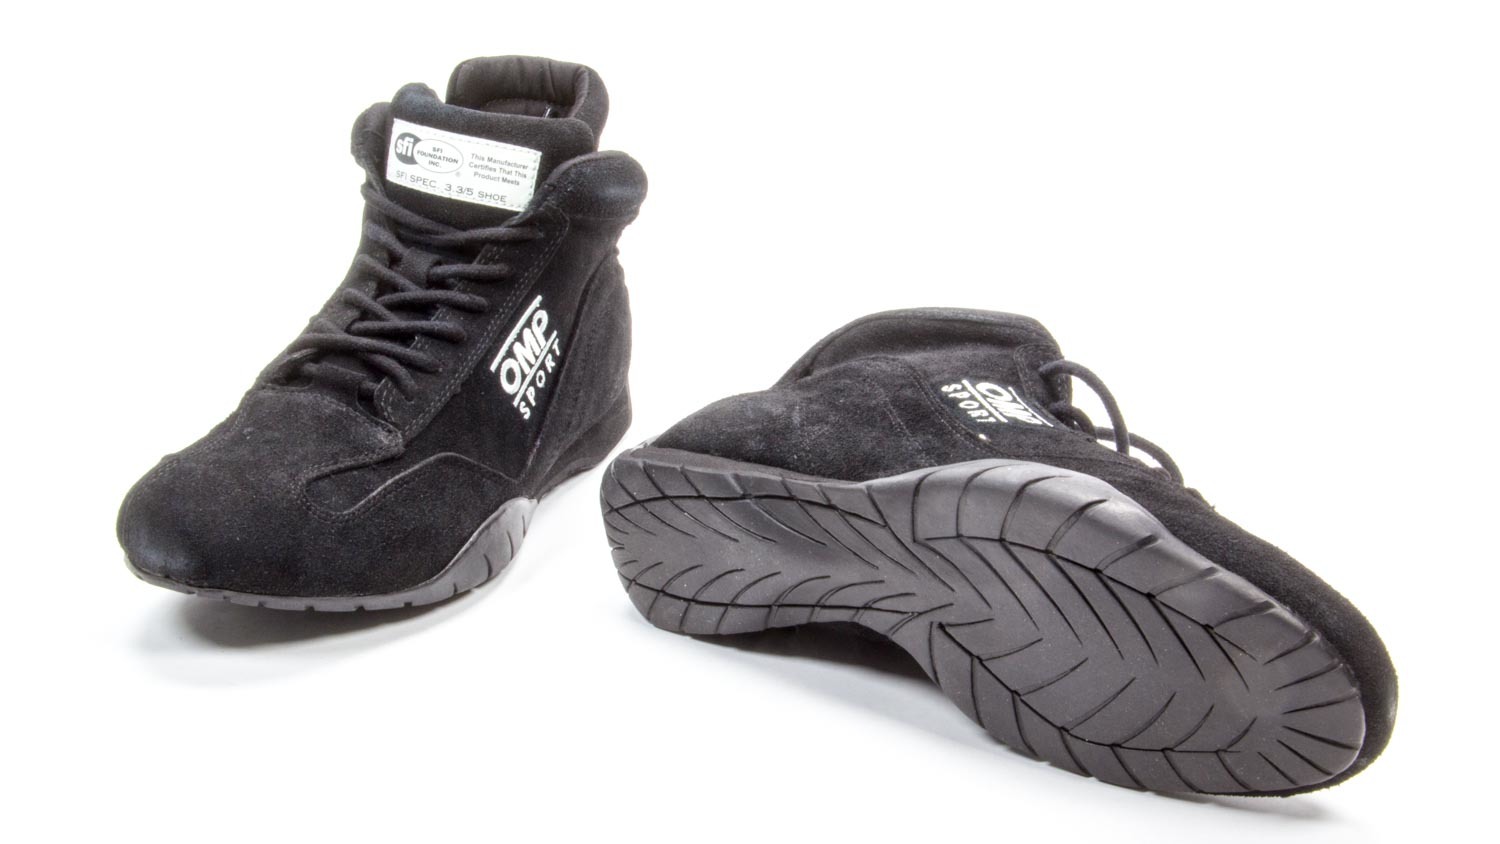 OMP Racing IC792071100 Shoe, OS 50, Driving, Mid-Top, SFI 3.3/5, Suede Leather Outer, Black, Size 10, Pair